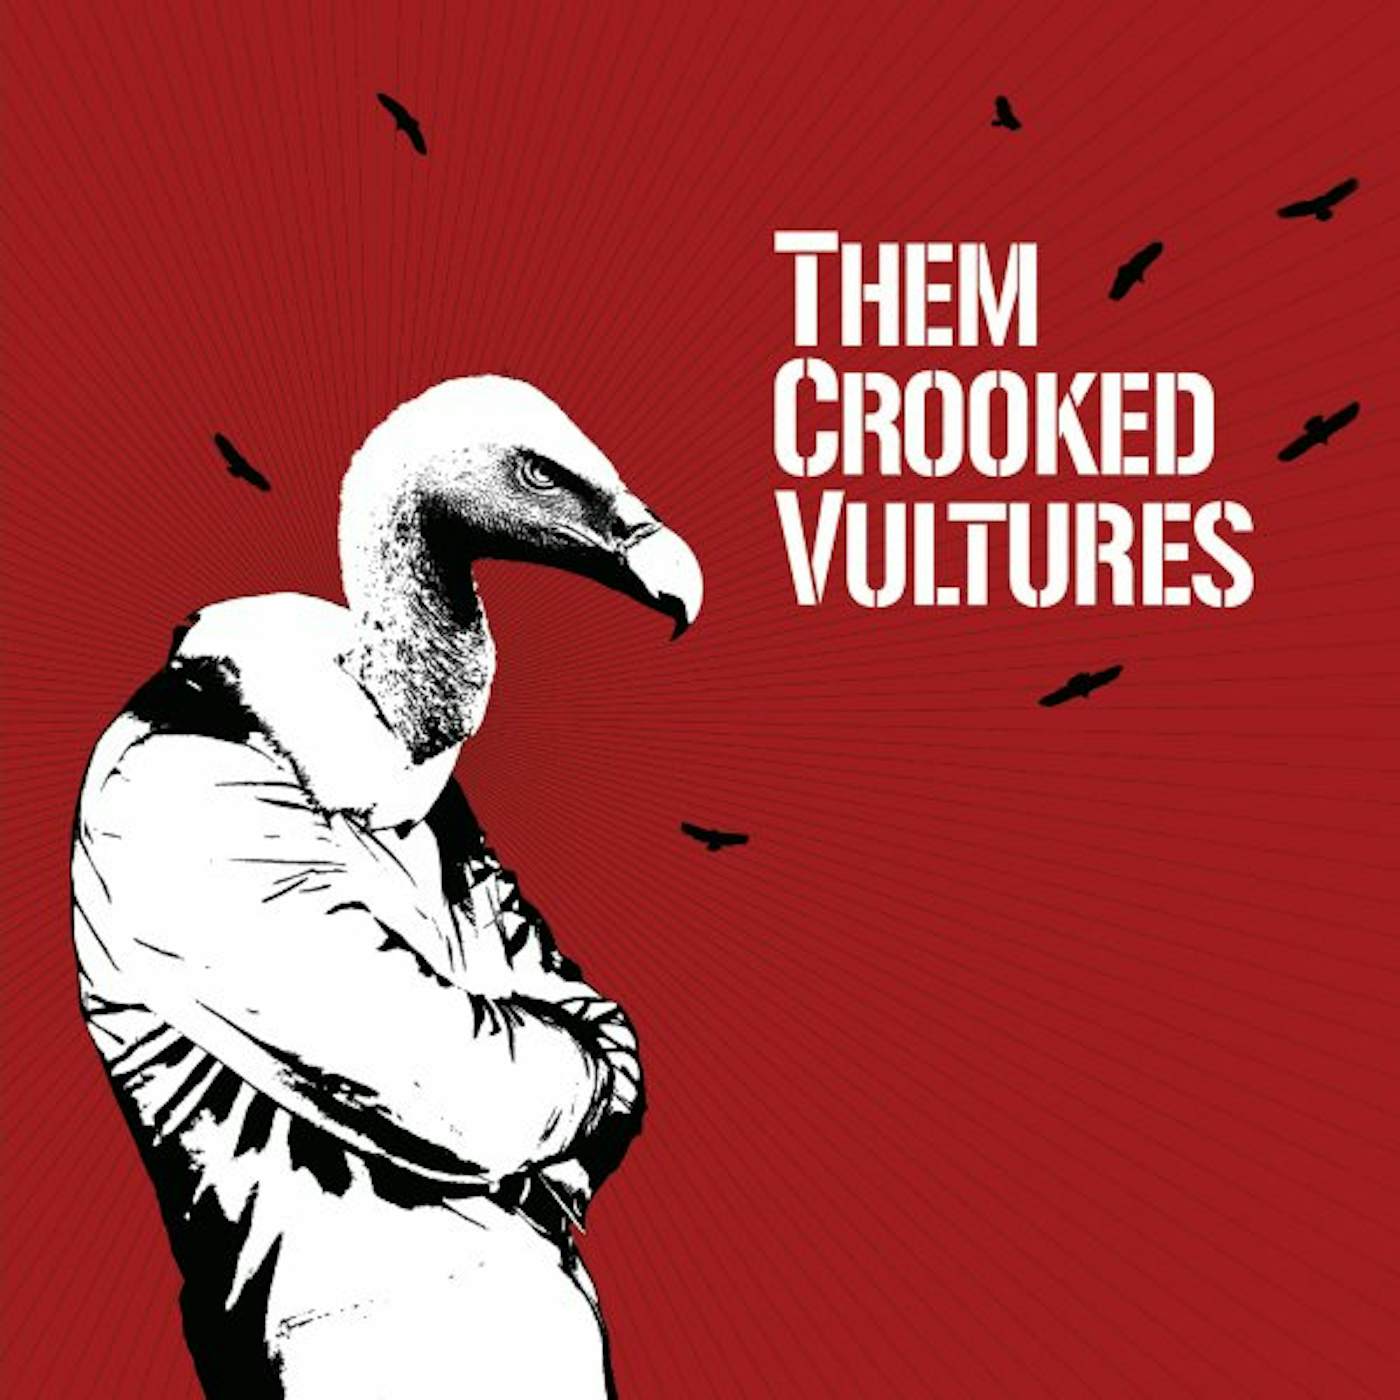 THEM CROOKED VULTURES CD